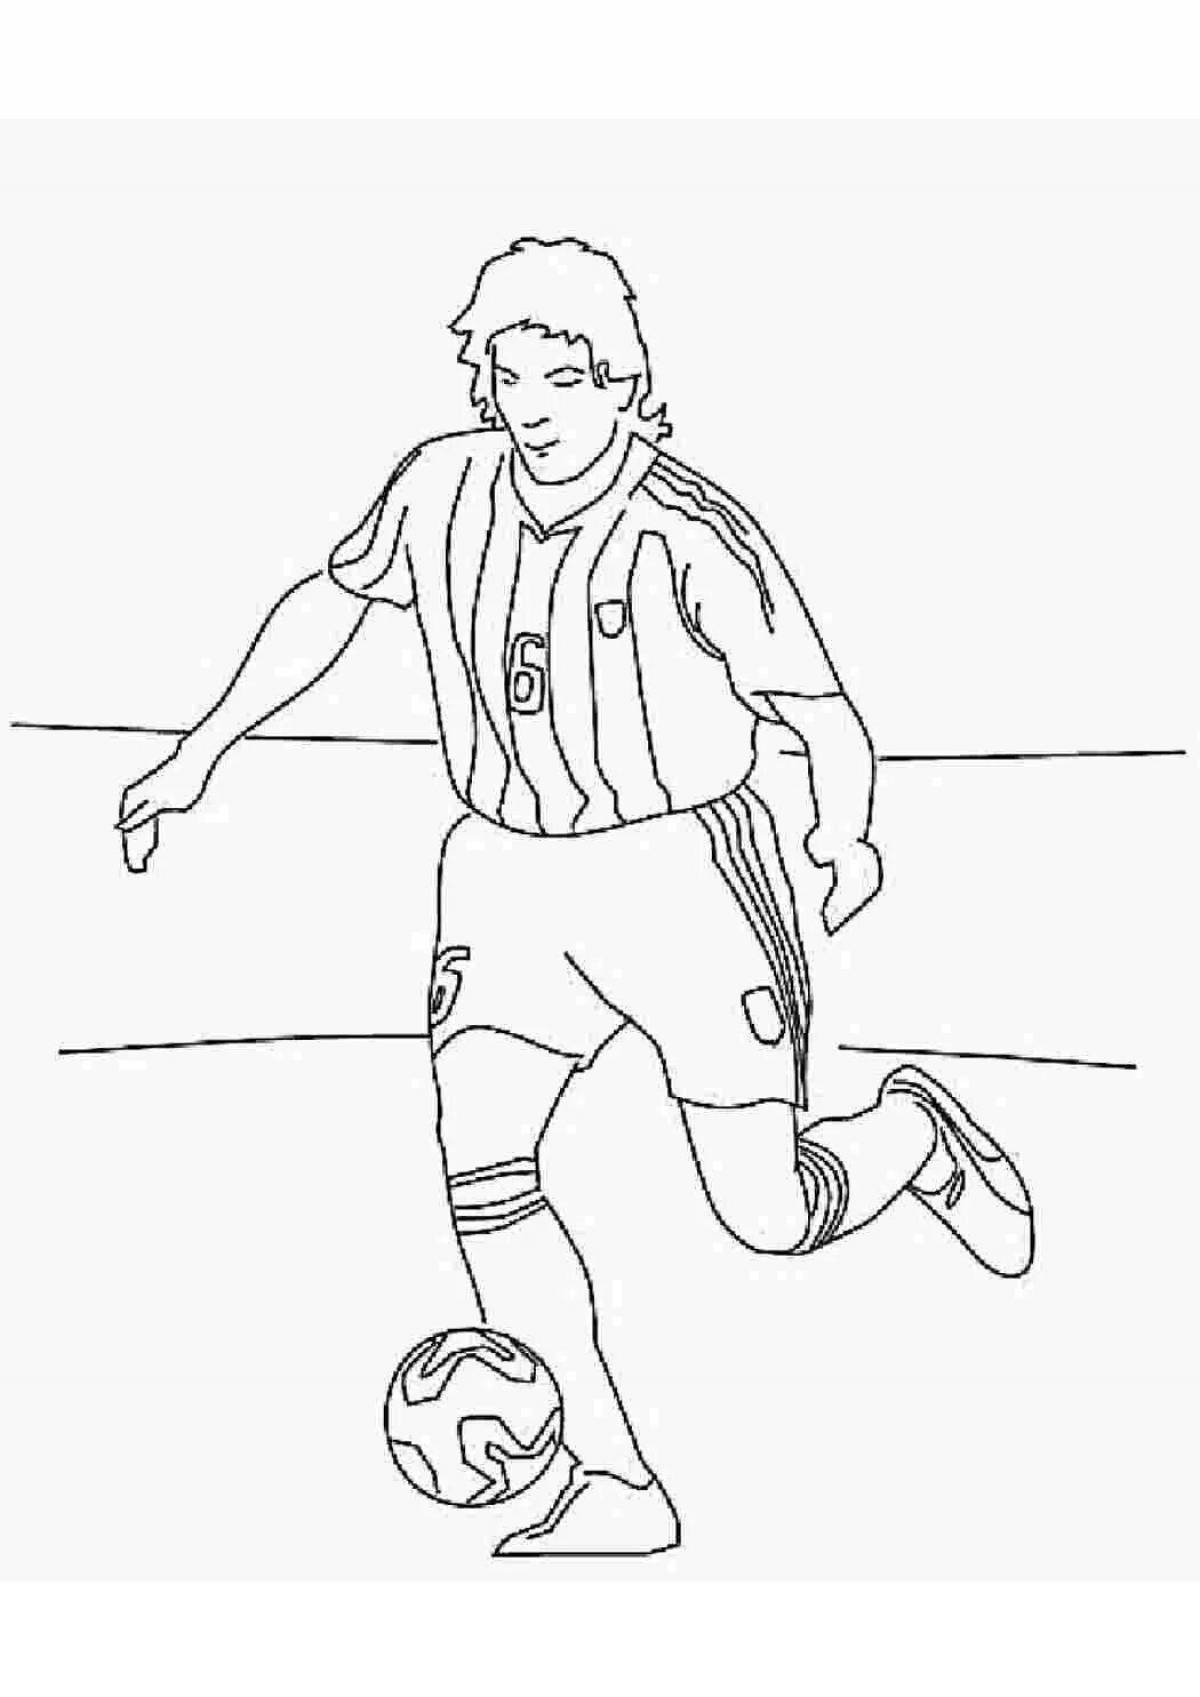 Coloring page energetic football players